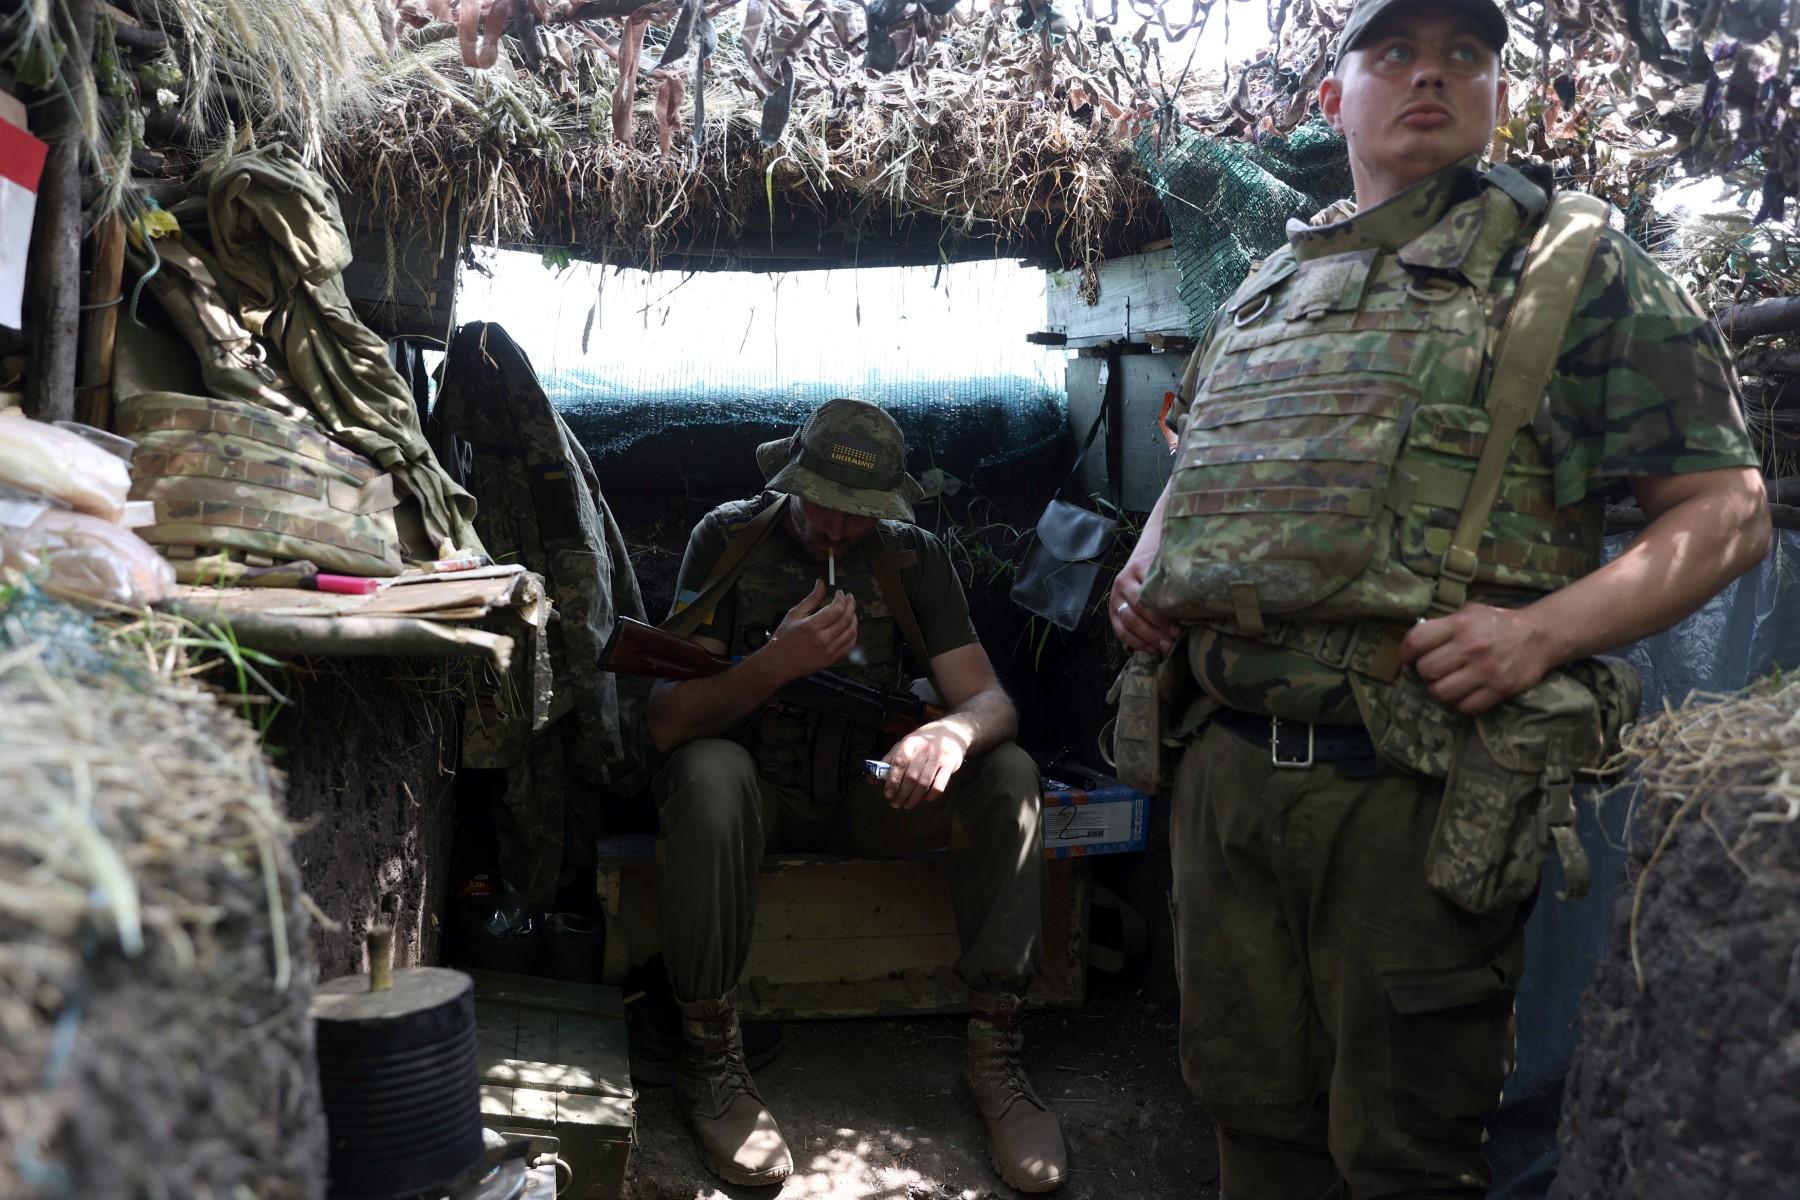 A Ukrainian serviceman smokes a cigarette as another looks on in an entrenched position on the front line near Avdiivka, Donetsk region on June 18. Photo: AFP